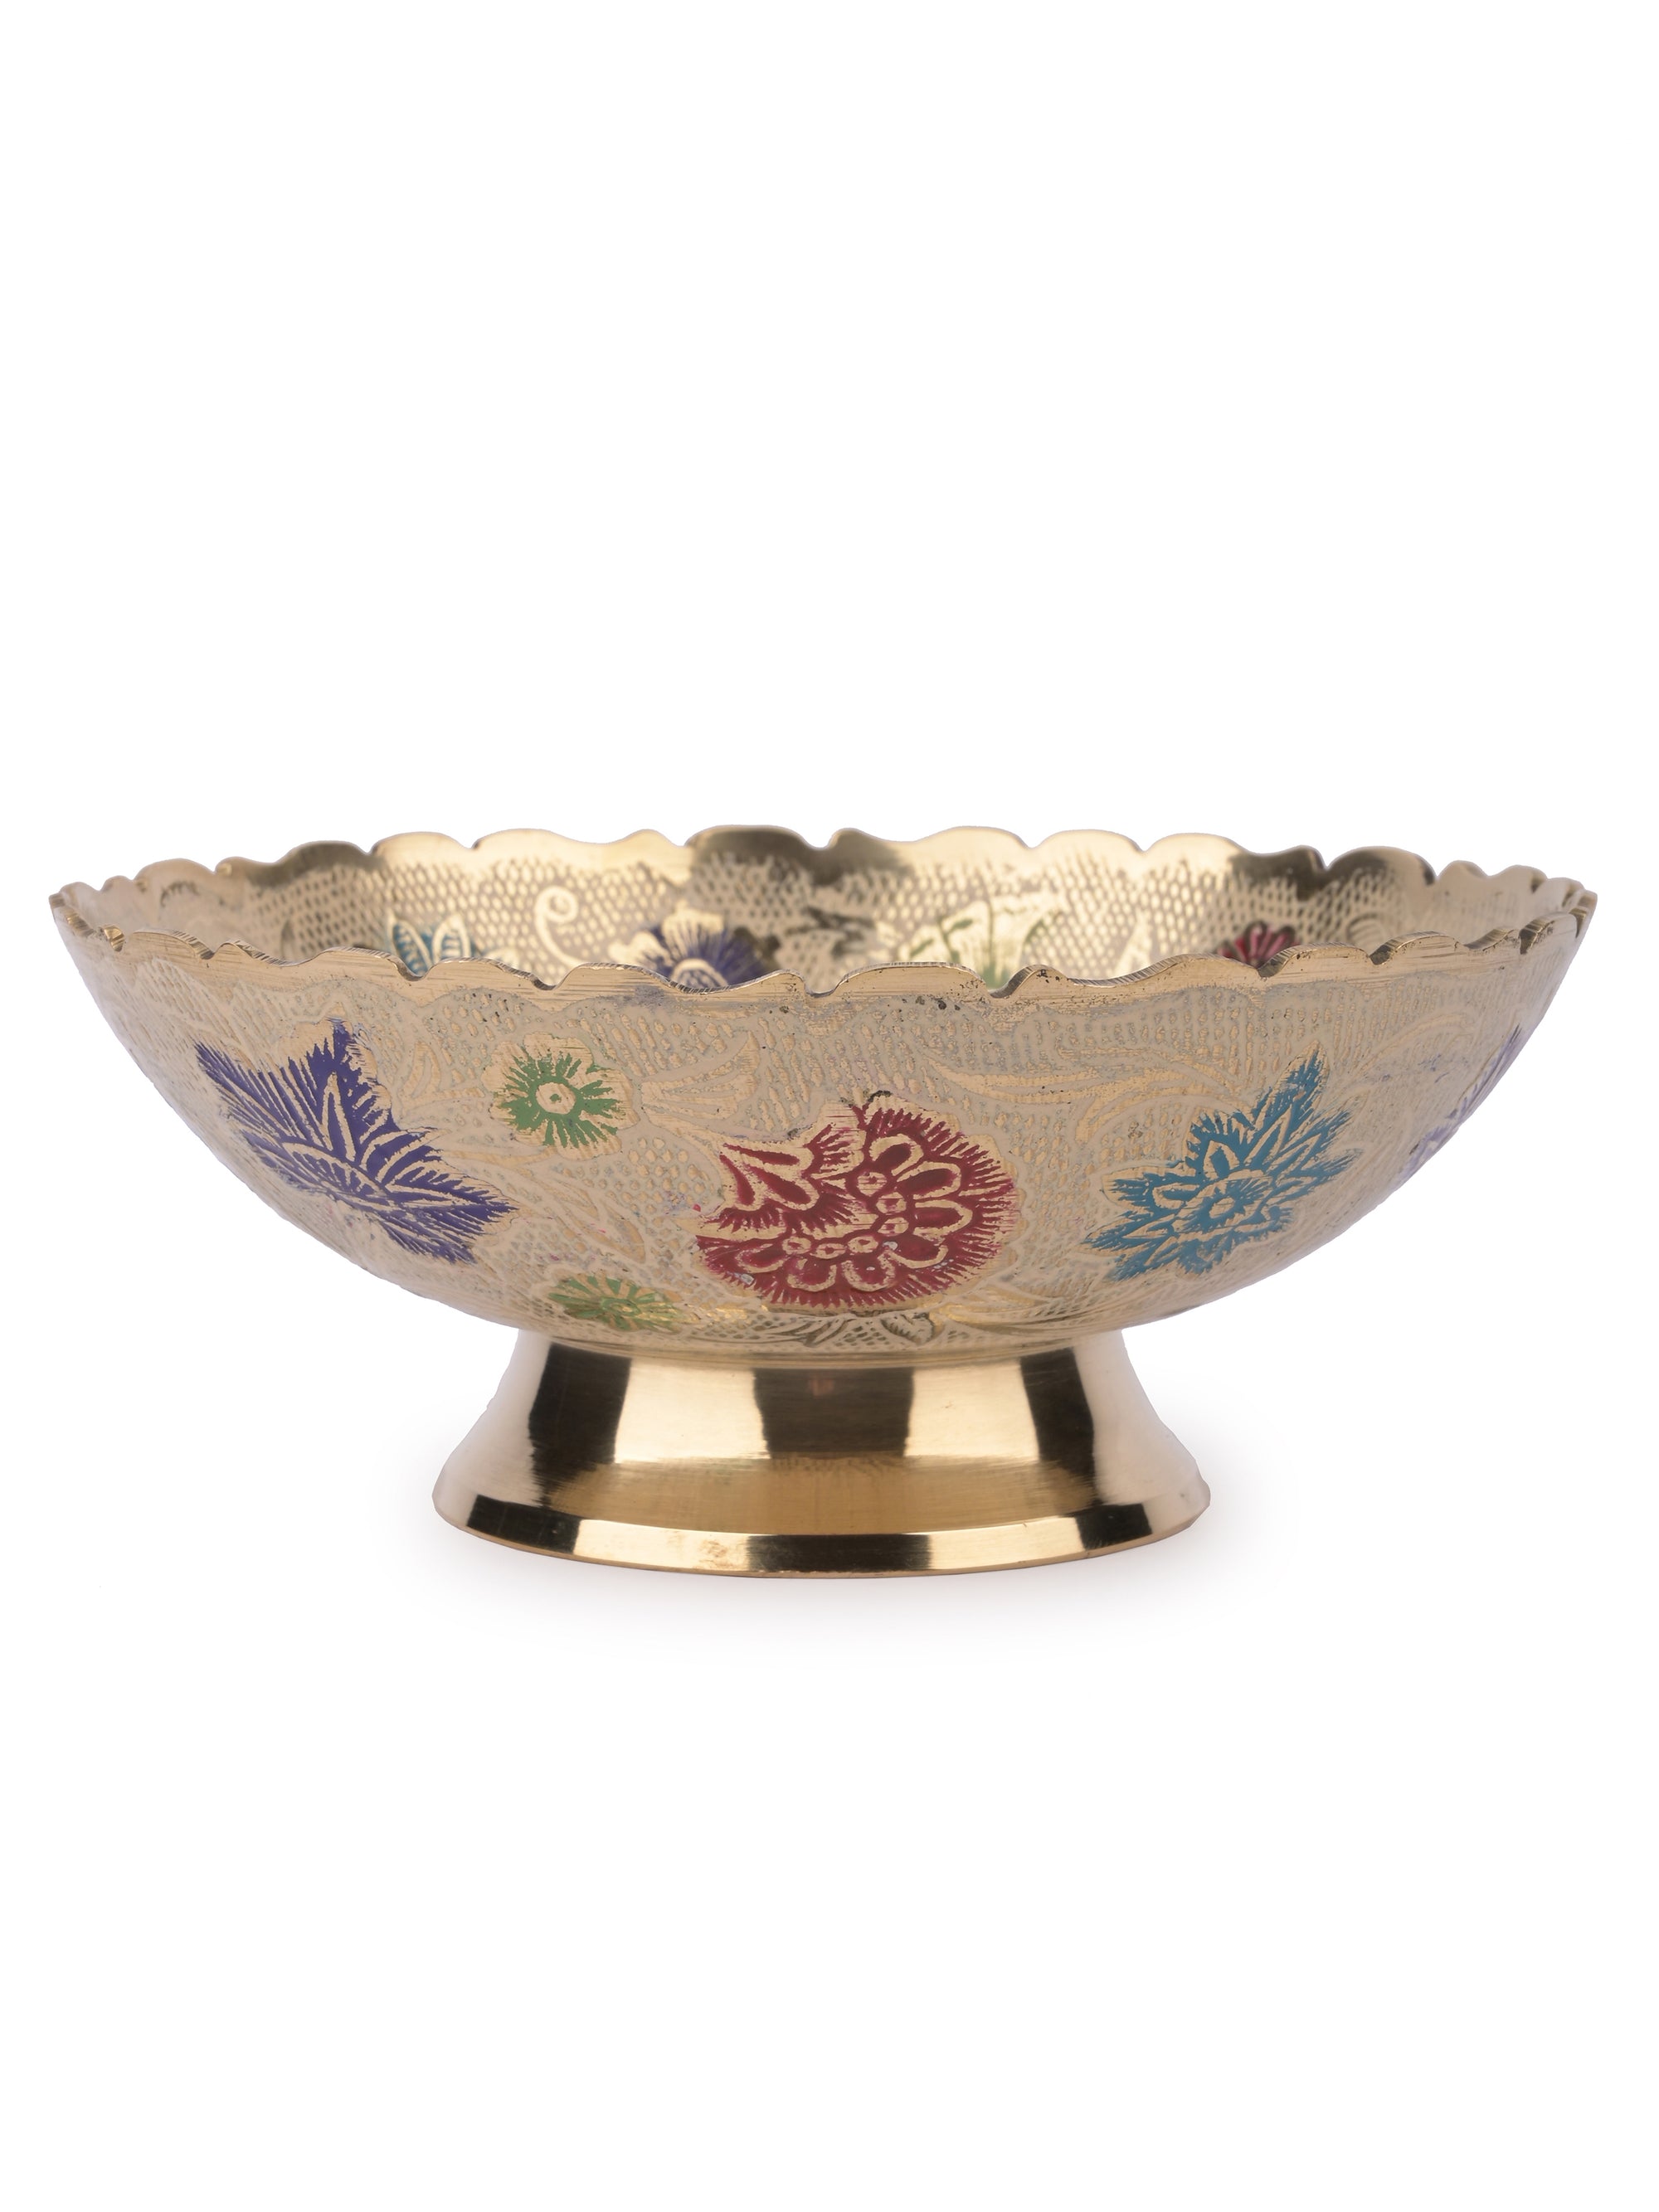 Painted Brass Fruit Bowl, Small size - 6 inches diameter - The Heritage Artifacts